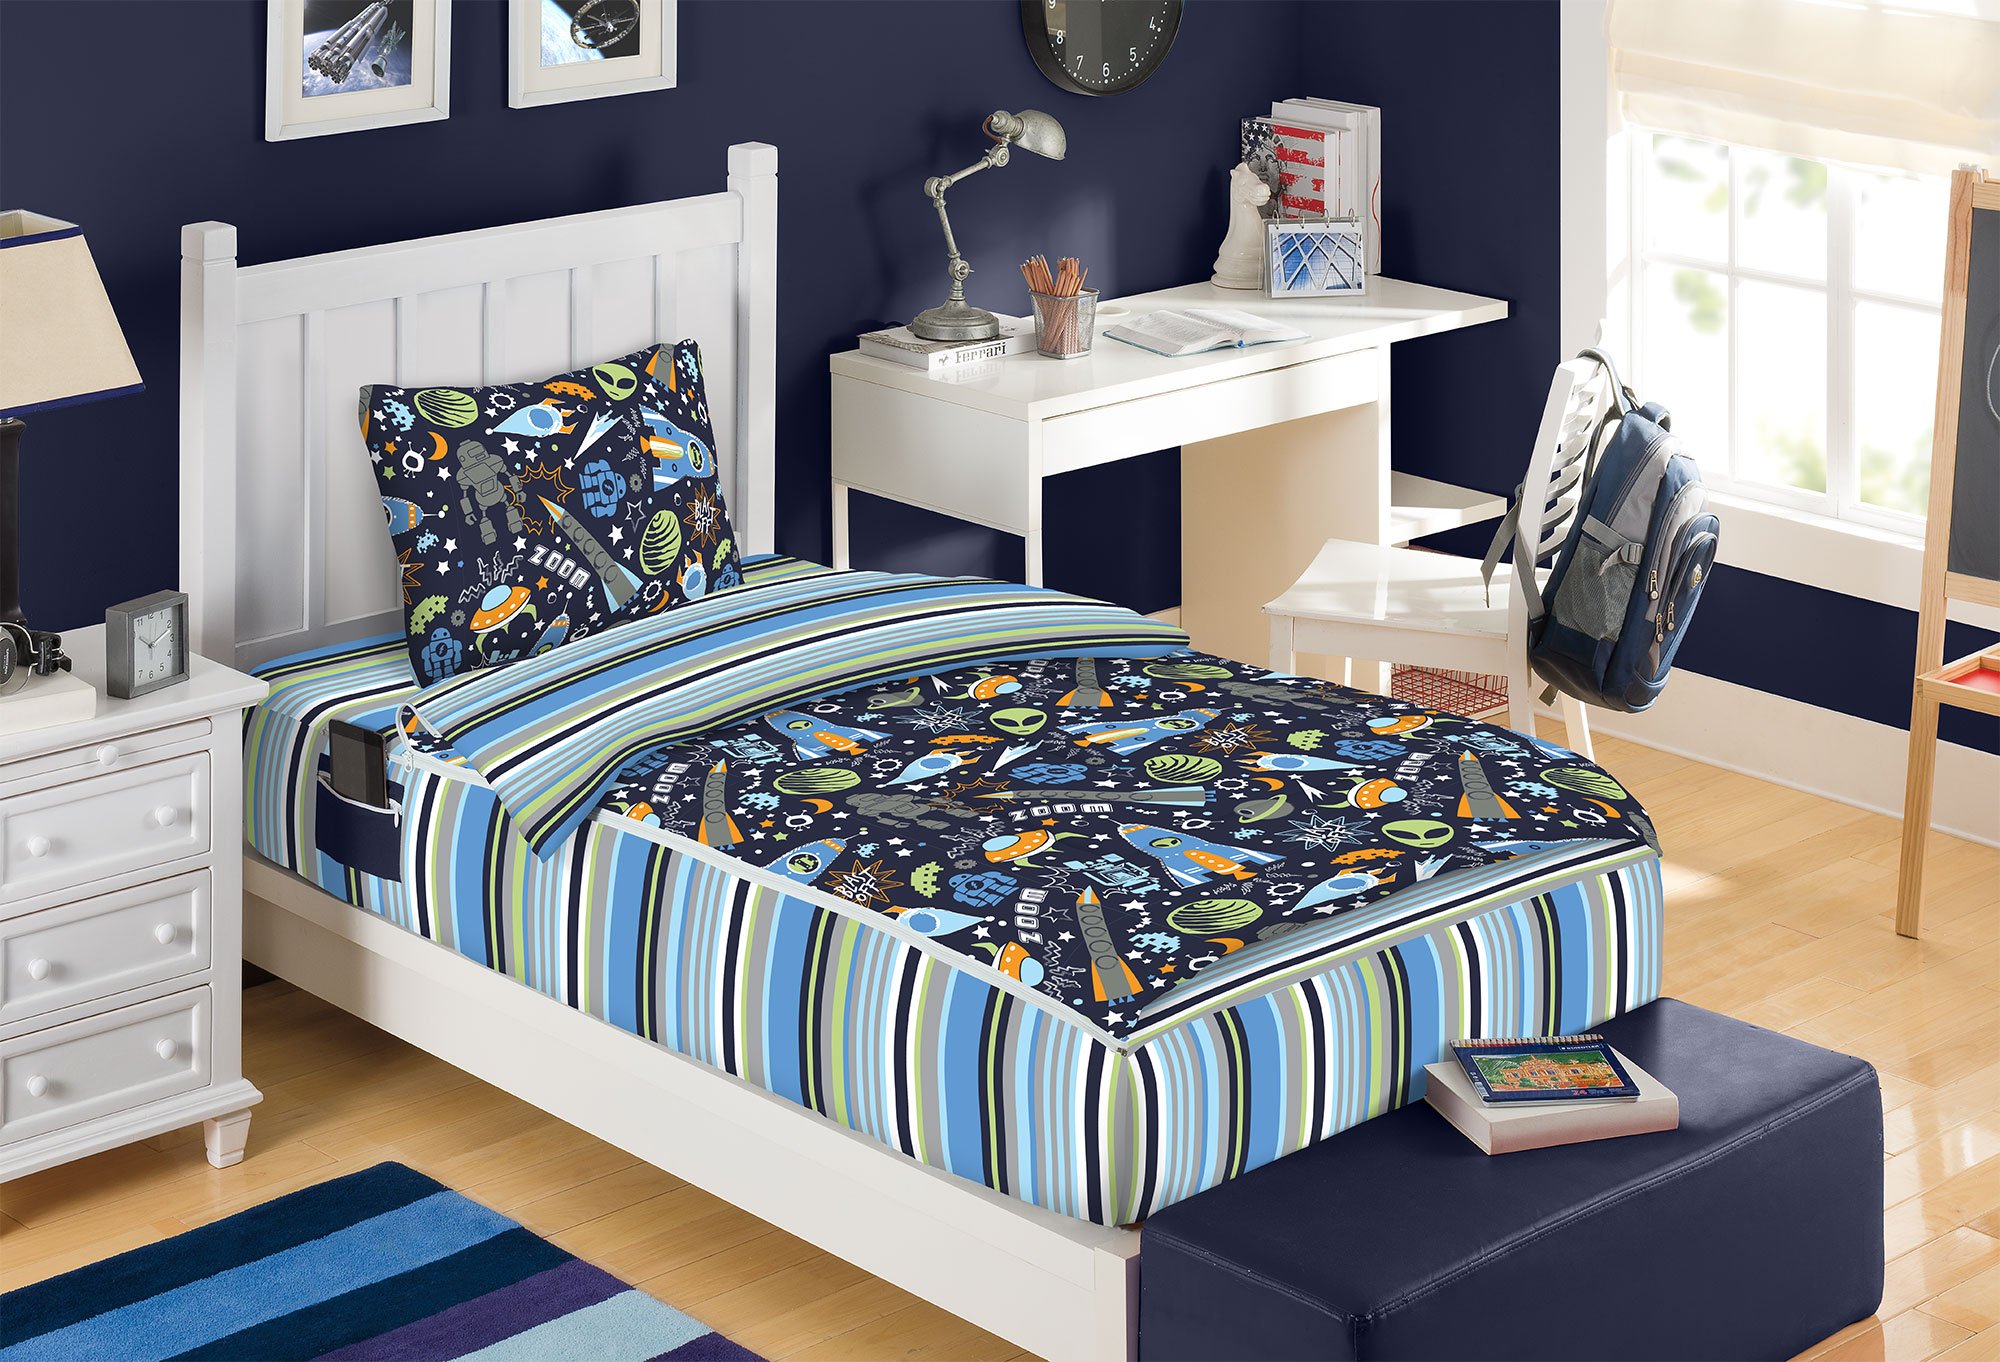 ZIPIT Bedding  As Seen On TV